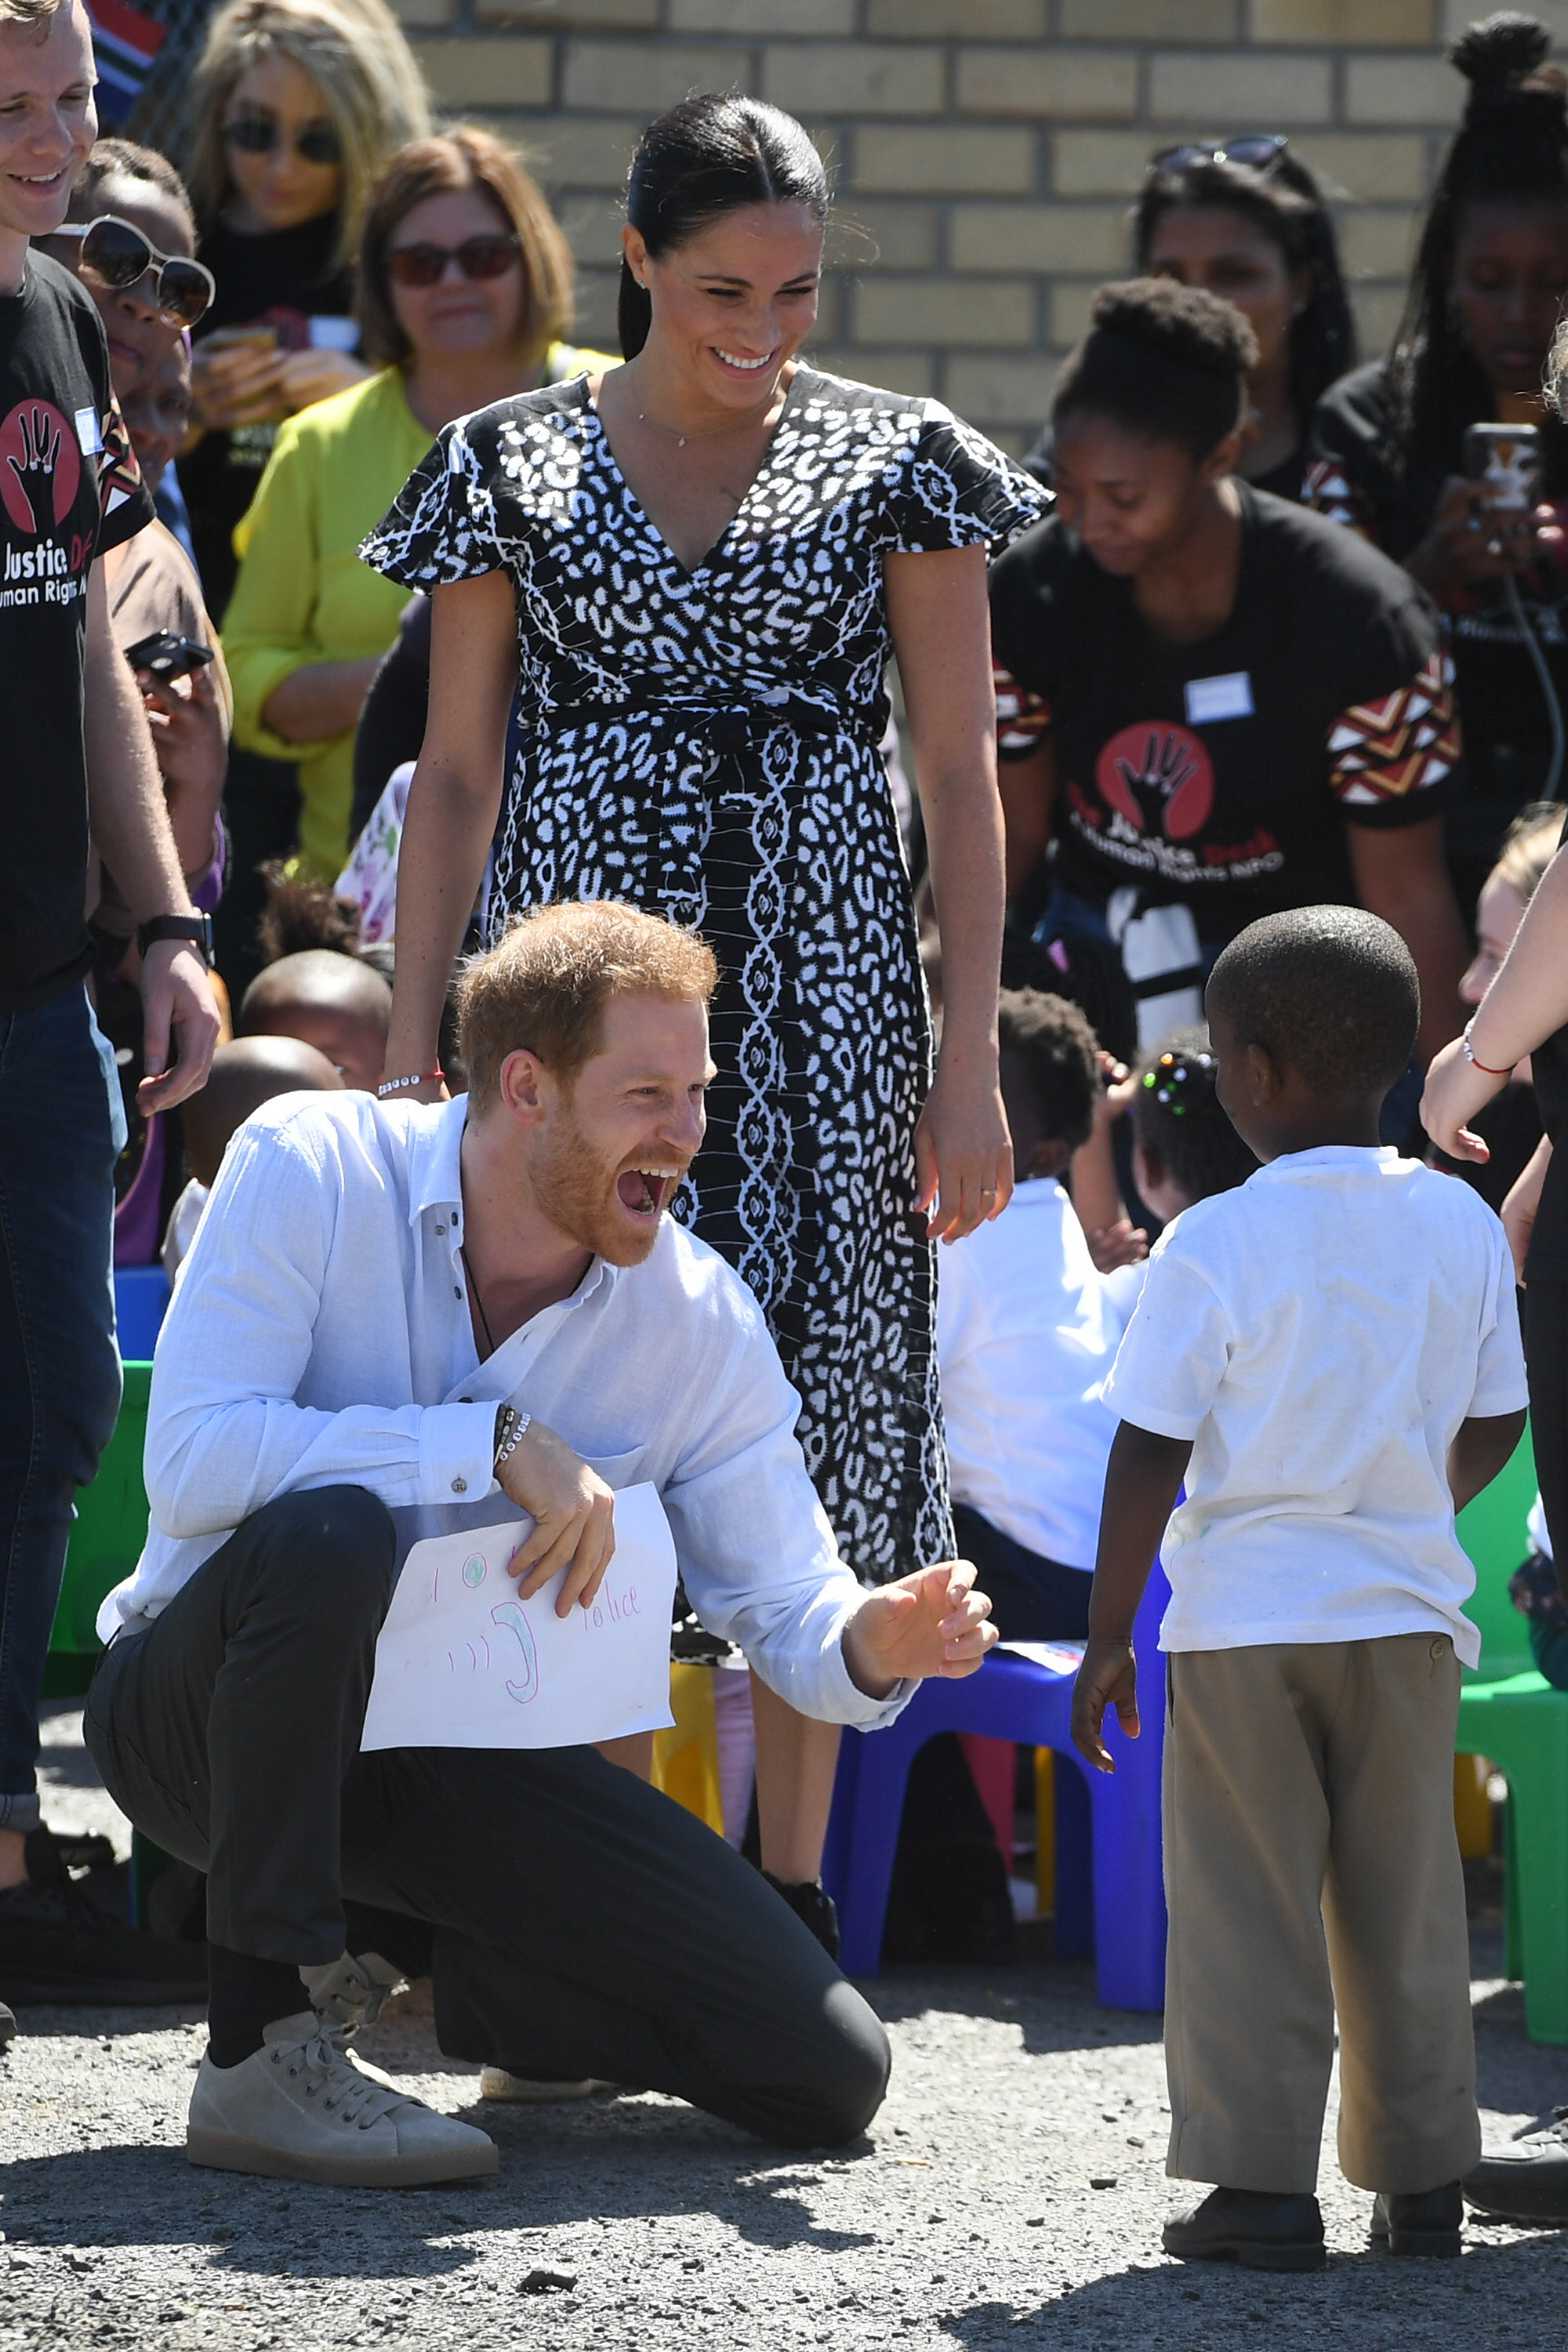 Meghan Markle and Prince Harry during their royal tour of South Africa on September 23, 2019 in Cape Town, South Africa | Source: Getty Images